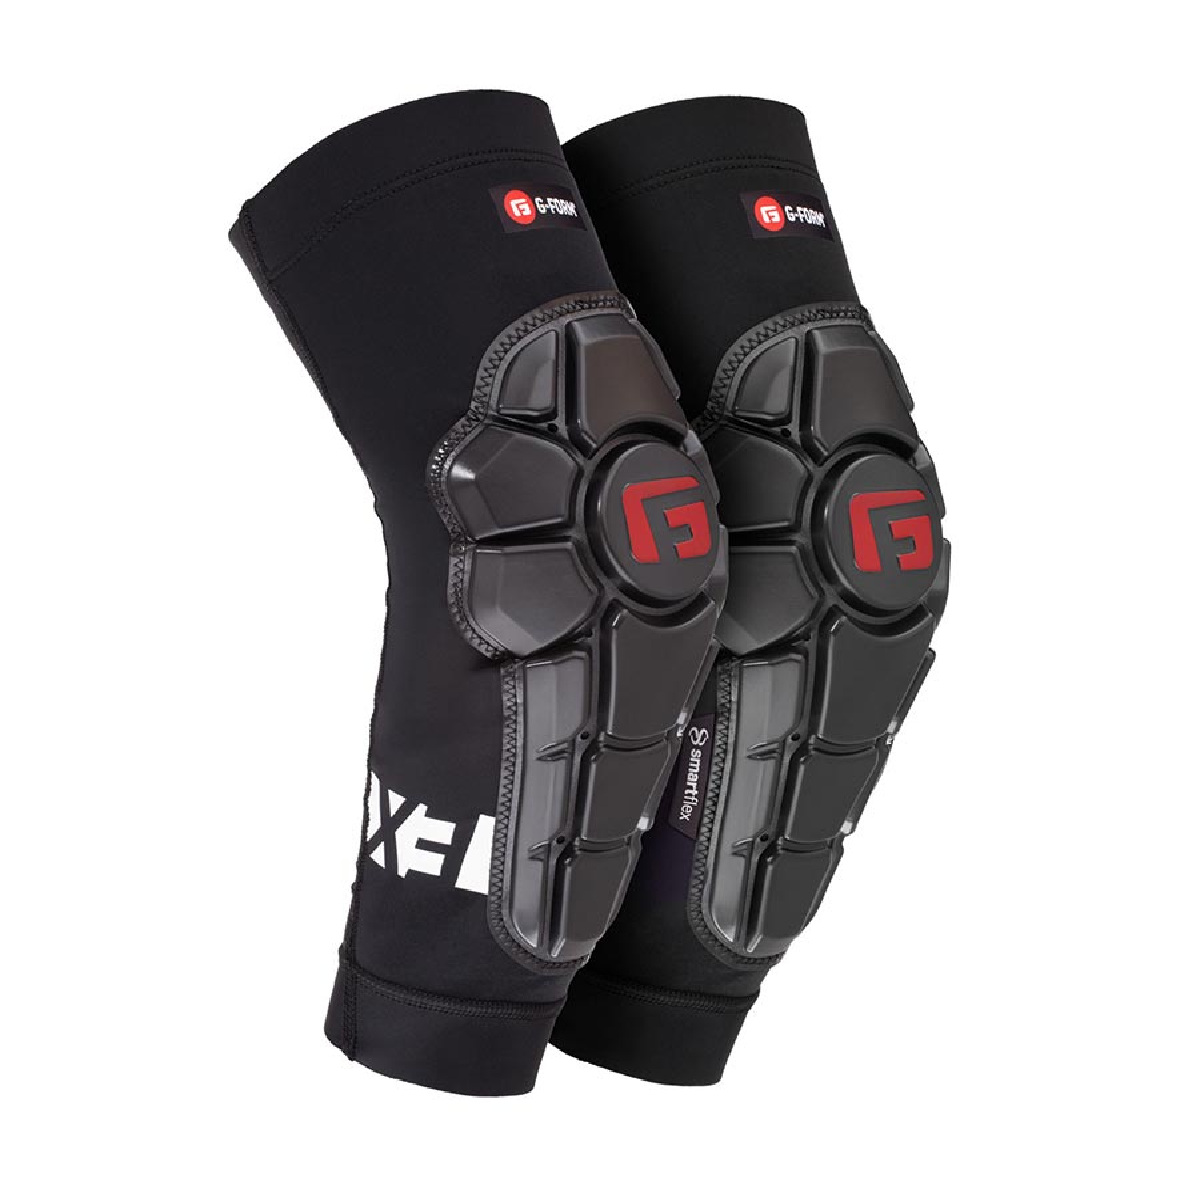 G-FORM PRO-X3 YOUTH ELBOW PADS